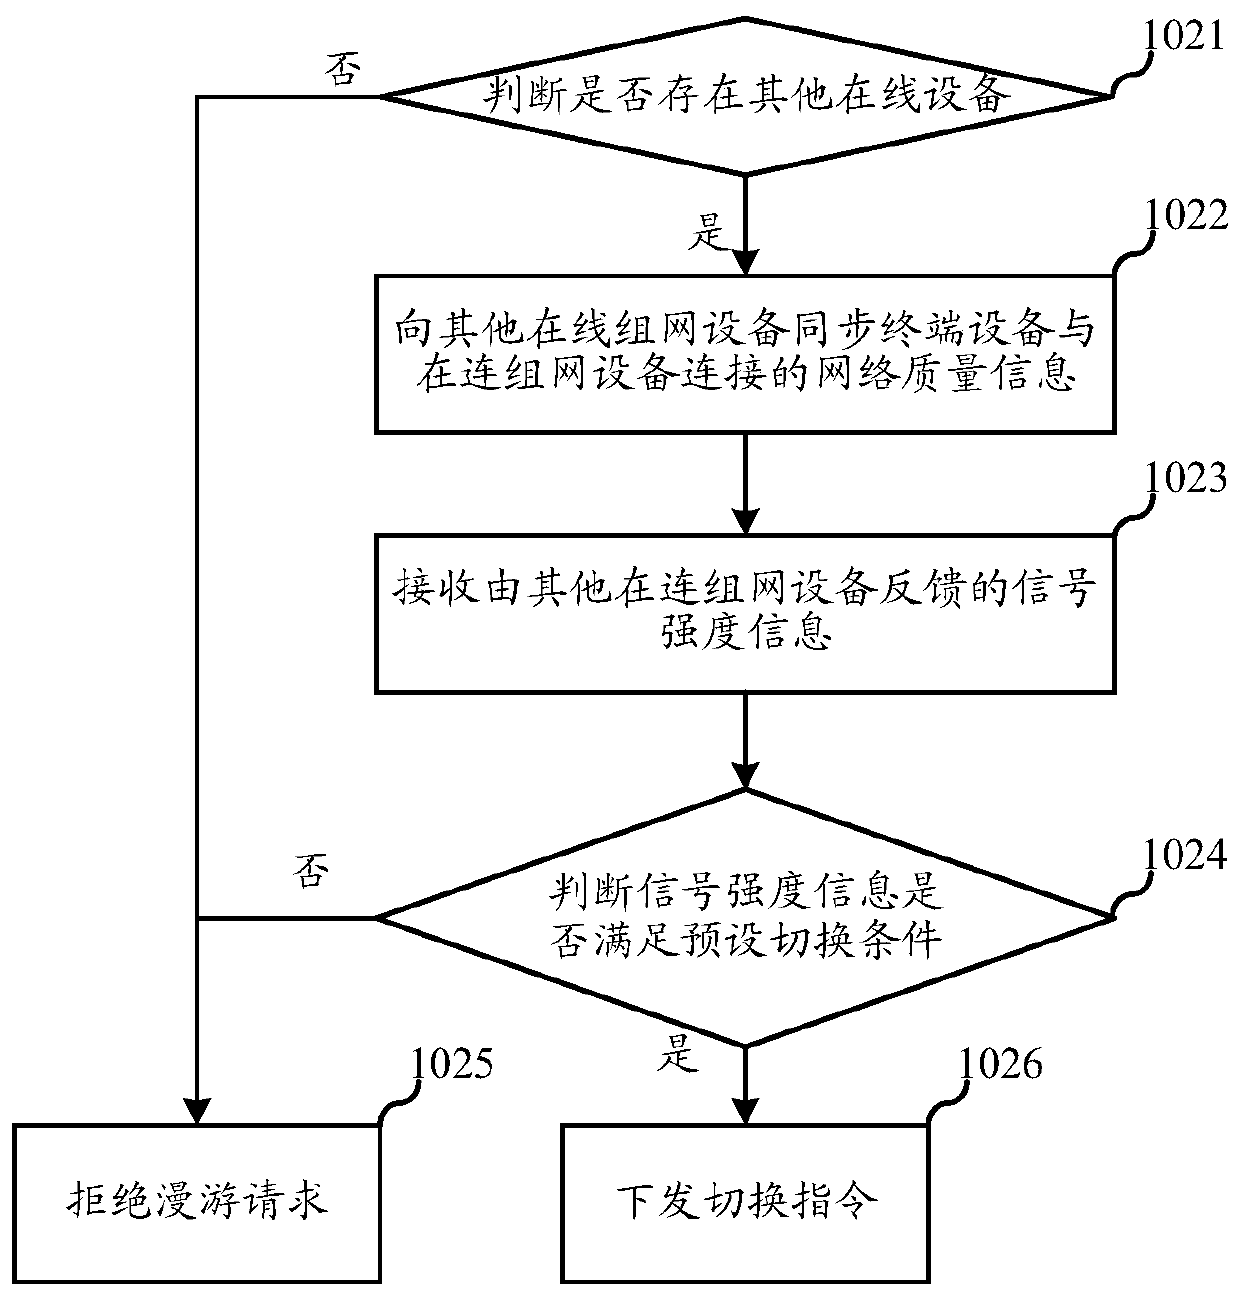 Household wireless roaming method and system, cloud equipment and networking equipment